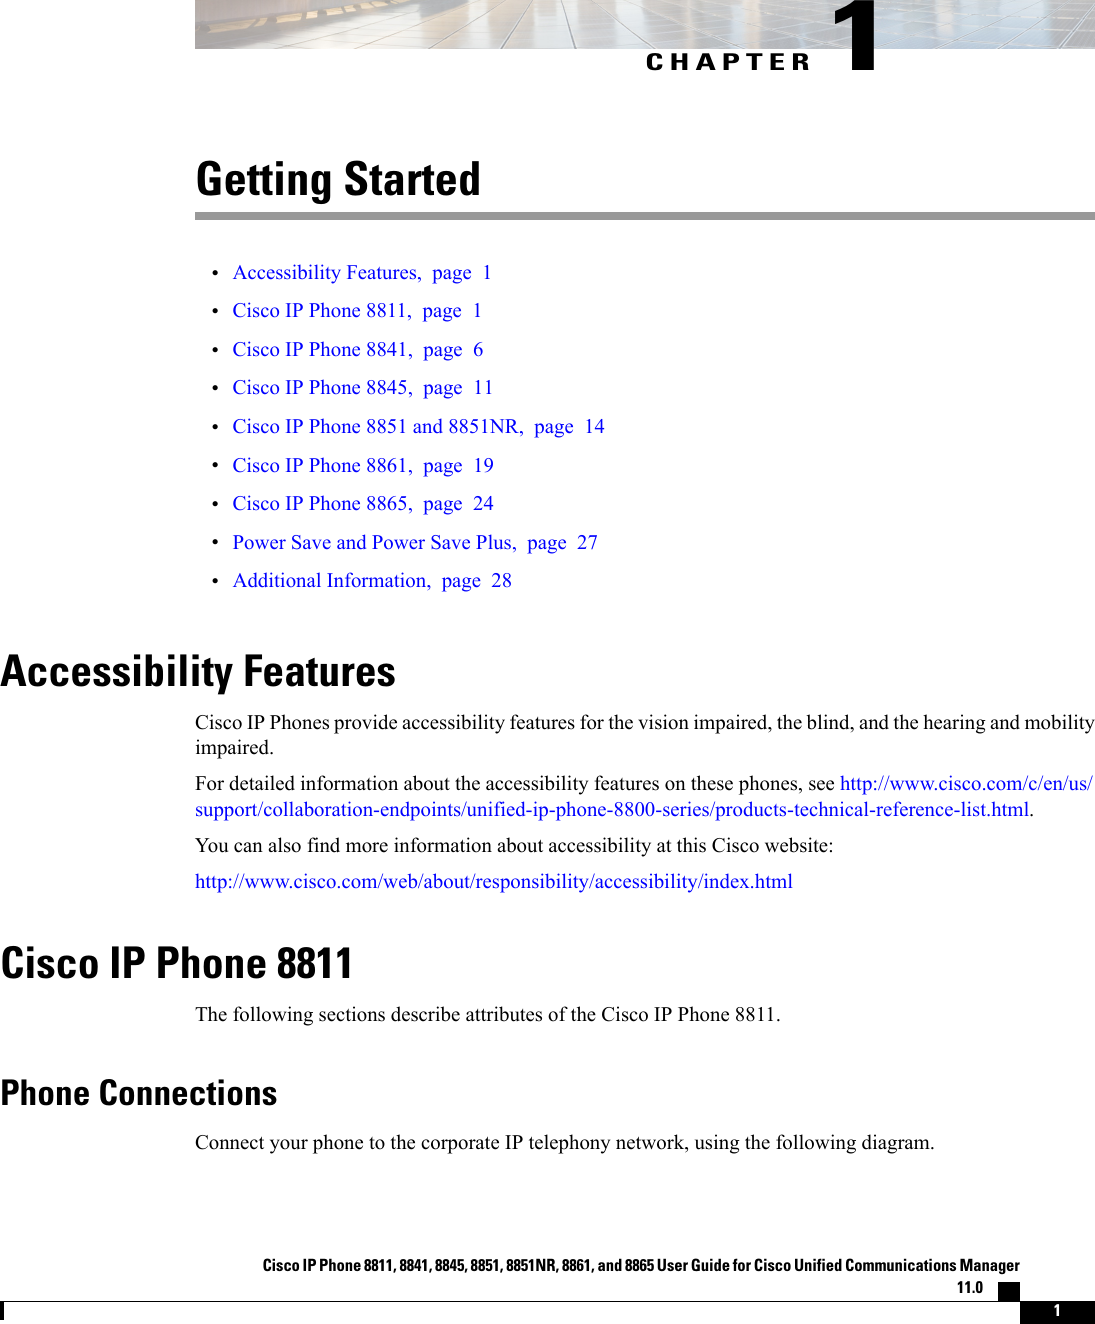 CHAPTER 1Getting Started•Accessibility Features, page 1•Cisco IP Phone 8811, page 1•Cisco IP Phone 8841, page 6•Cisco IP Phone 8845, page 11•Cisco IP Phone 8851 and 8851NR, page 14•Cisco IP Phone 8861, page 19•Cisco IP Phone 8865, page 24•Power Save and Power Save Plus, page 27•Additional Information, page 28Accessibility FeaturesCisco IP Phones provide accessibility features for the vision impaired, the blind, and the hearing and mobilityimpaired.For detailed information about the accessibility features on these phones, see http://www.cisco.com/c/en/us/support/collaboration-endpoints/unified-ip-phone-8800-series/products-technical-reference-list.html.You can also find more information about accessibility at this Cisco website:http://www.cisco.com/web/about/responsibility/accessibility/index.htmlCisco IP Phone 8811The following sections describe attributes of the Cisco IP Phone 8811.Phone ConnectionsConnect your phone to the corporate IP telephony network, using the following diagram.Cisco IP Phone 8811, 8841, 8845, 8851, 8851NR, 8861, and 8865 User Guide for Cisco Unified Communications Manager11.0    1